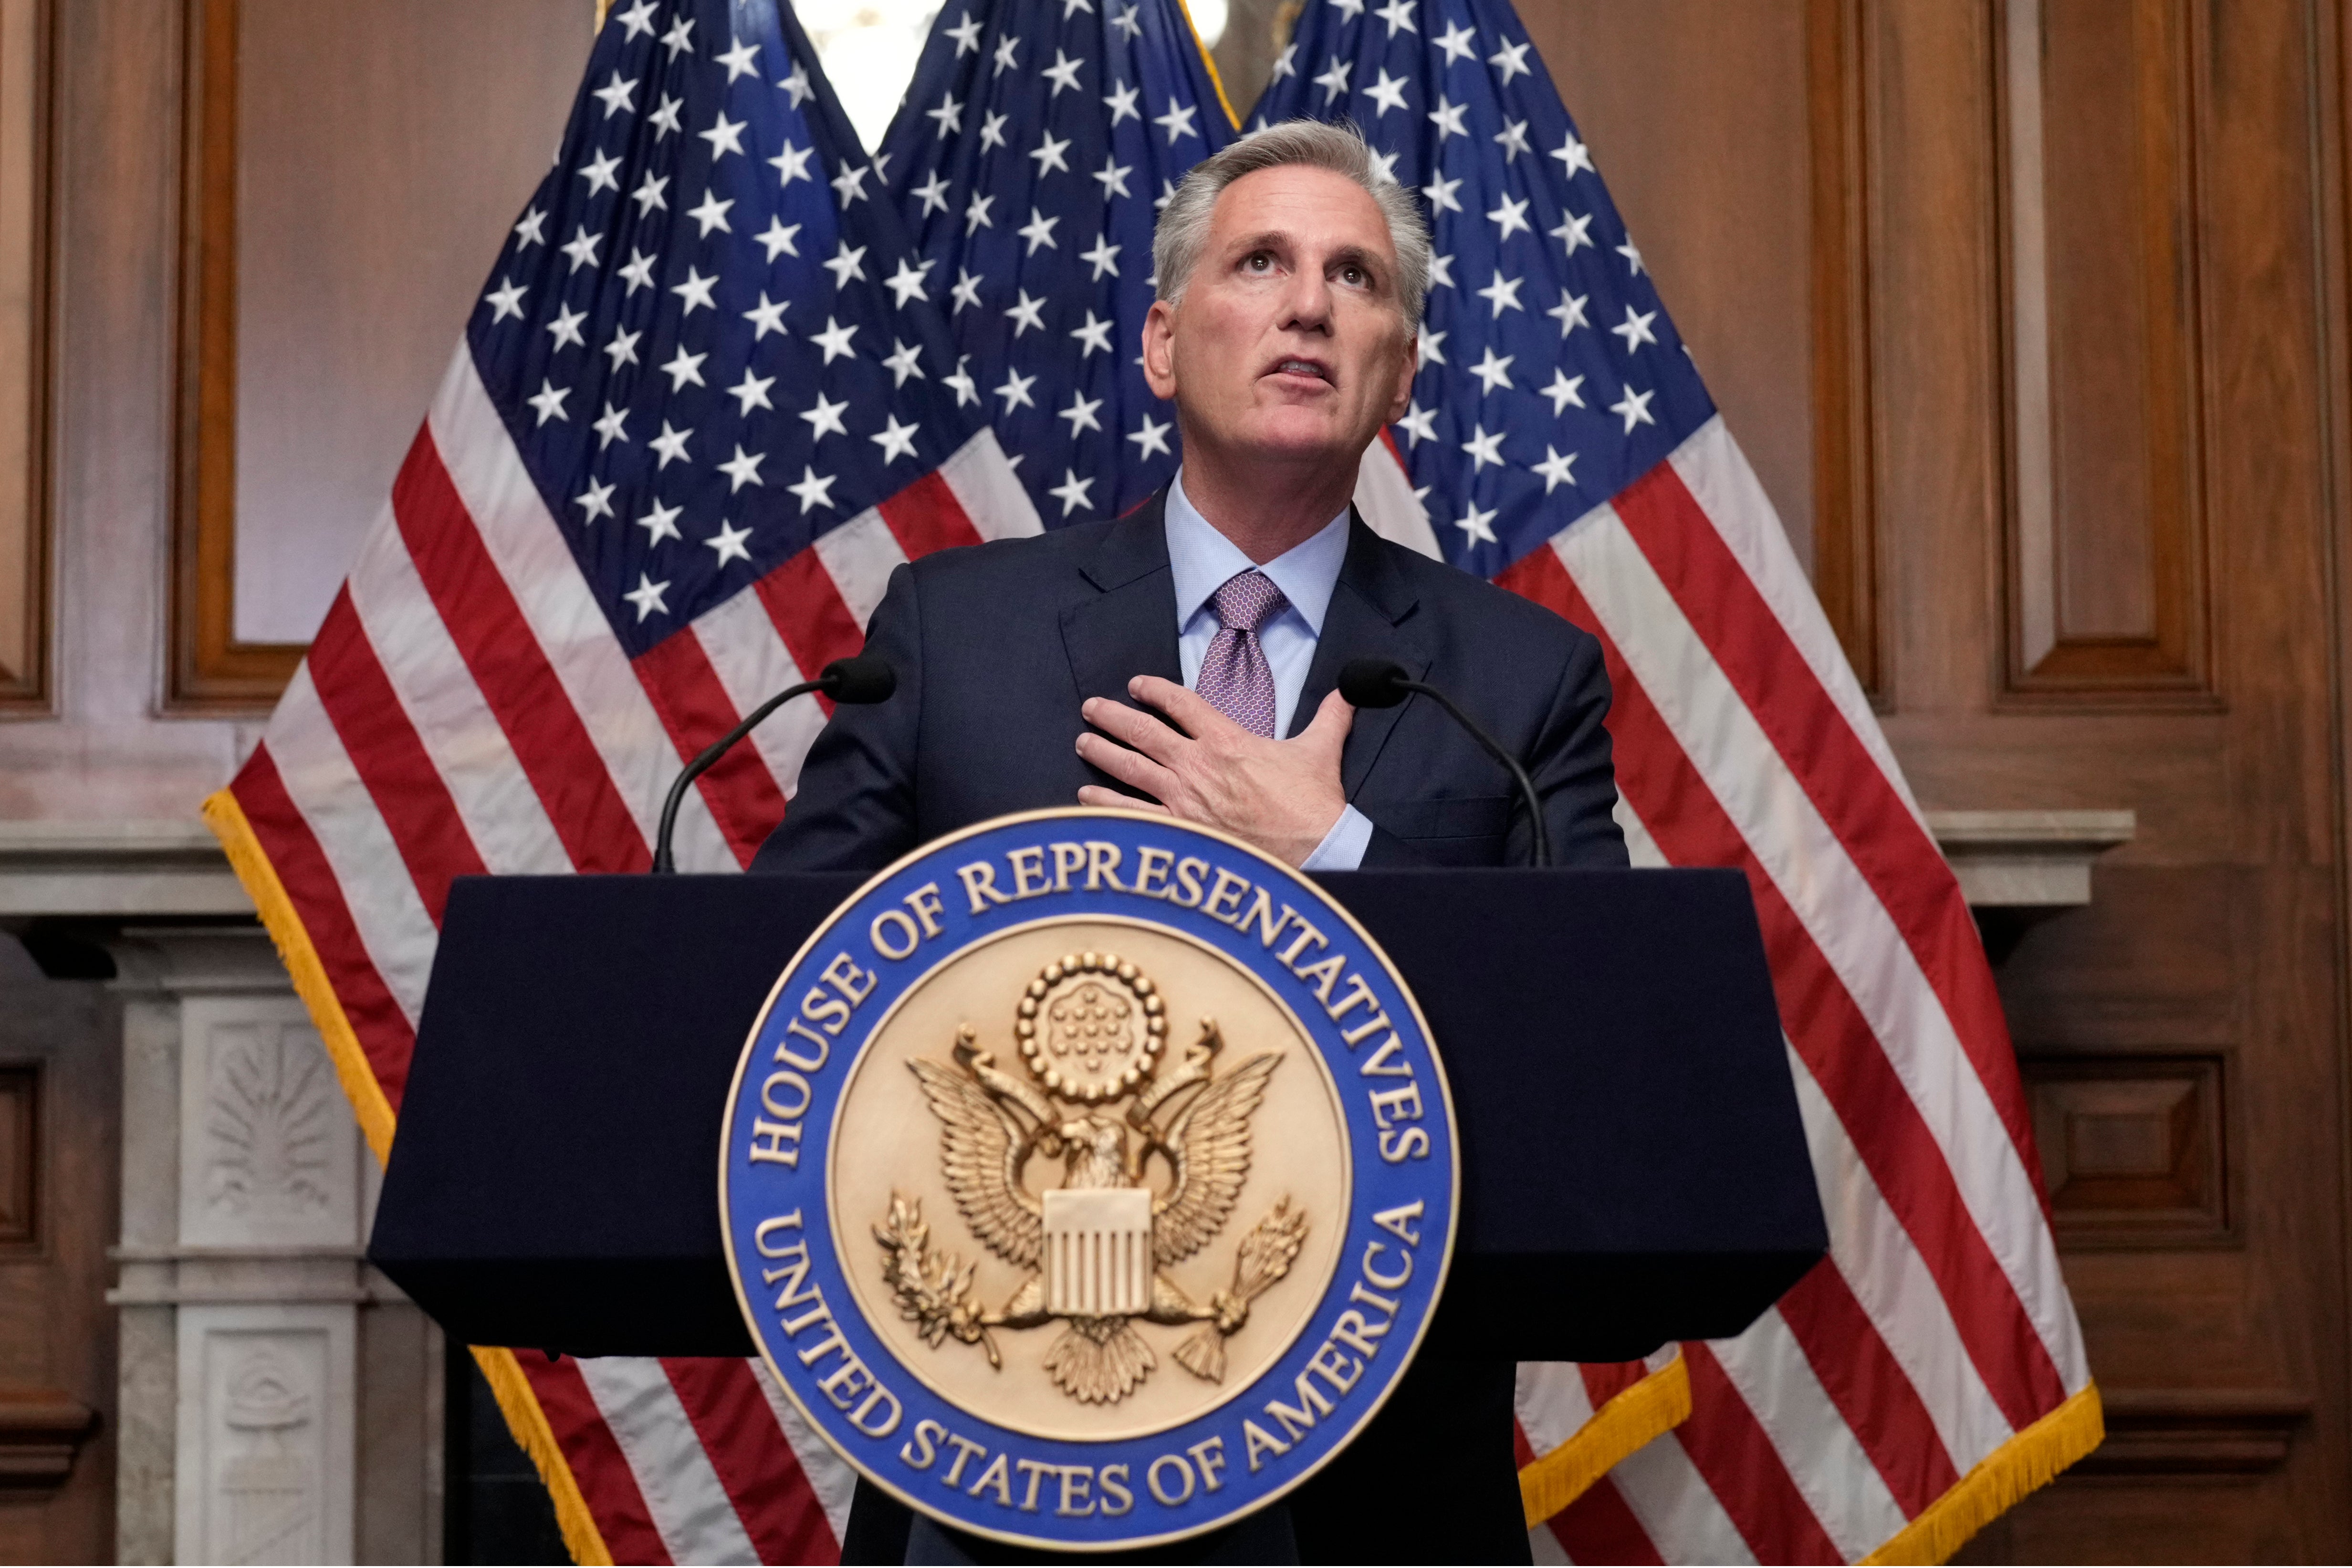 The Republican Party is unmanageable and ungovernable, as it proved by ousting Kevin McCarthy